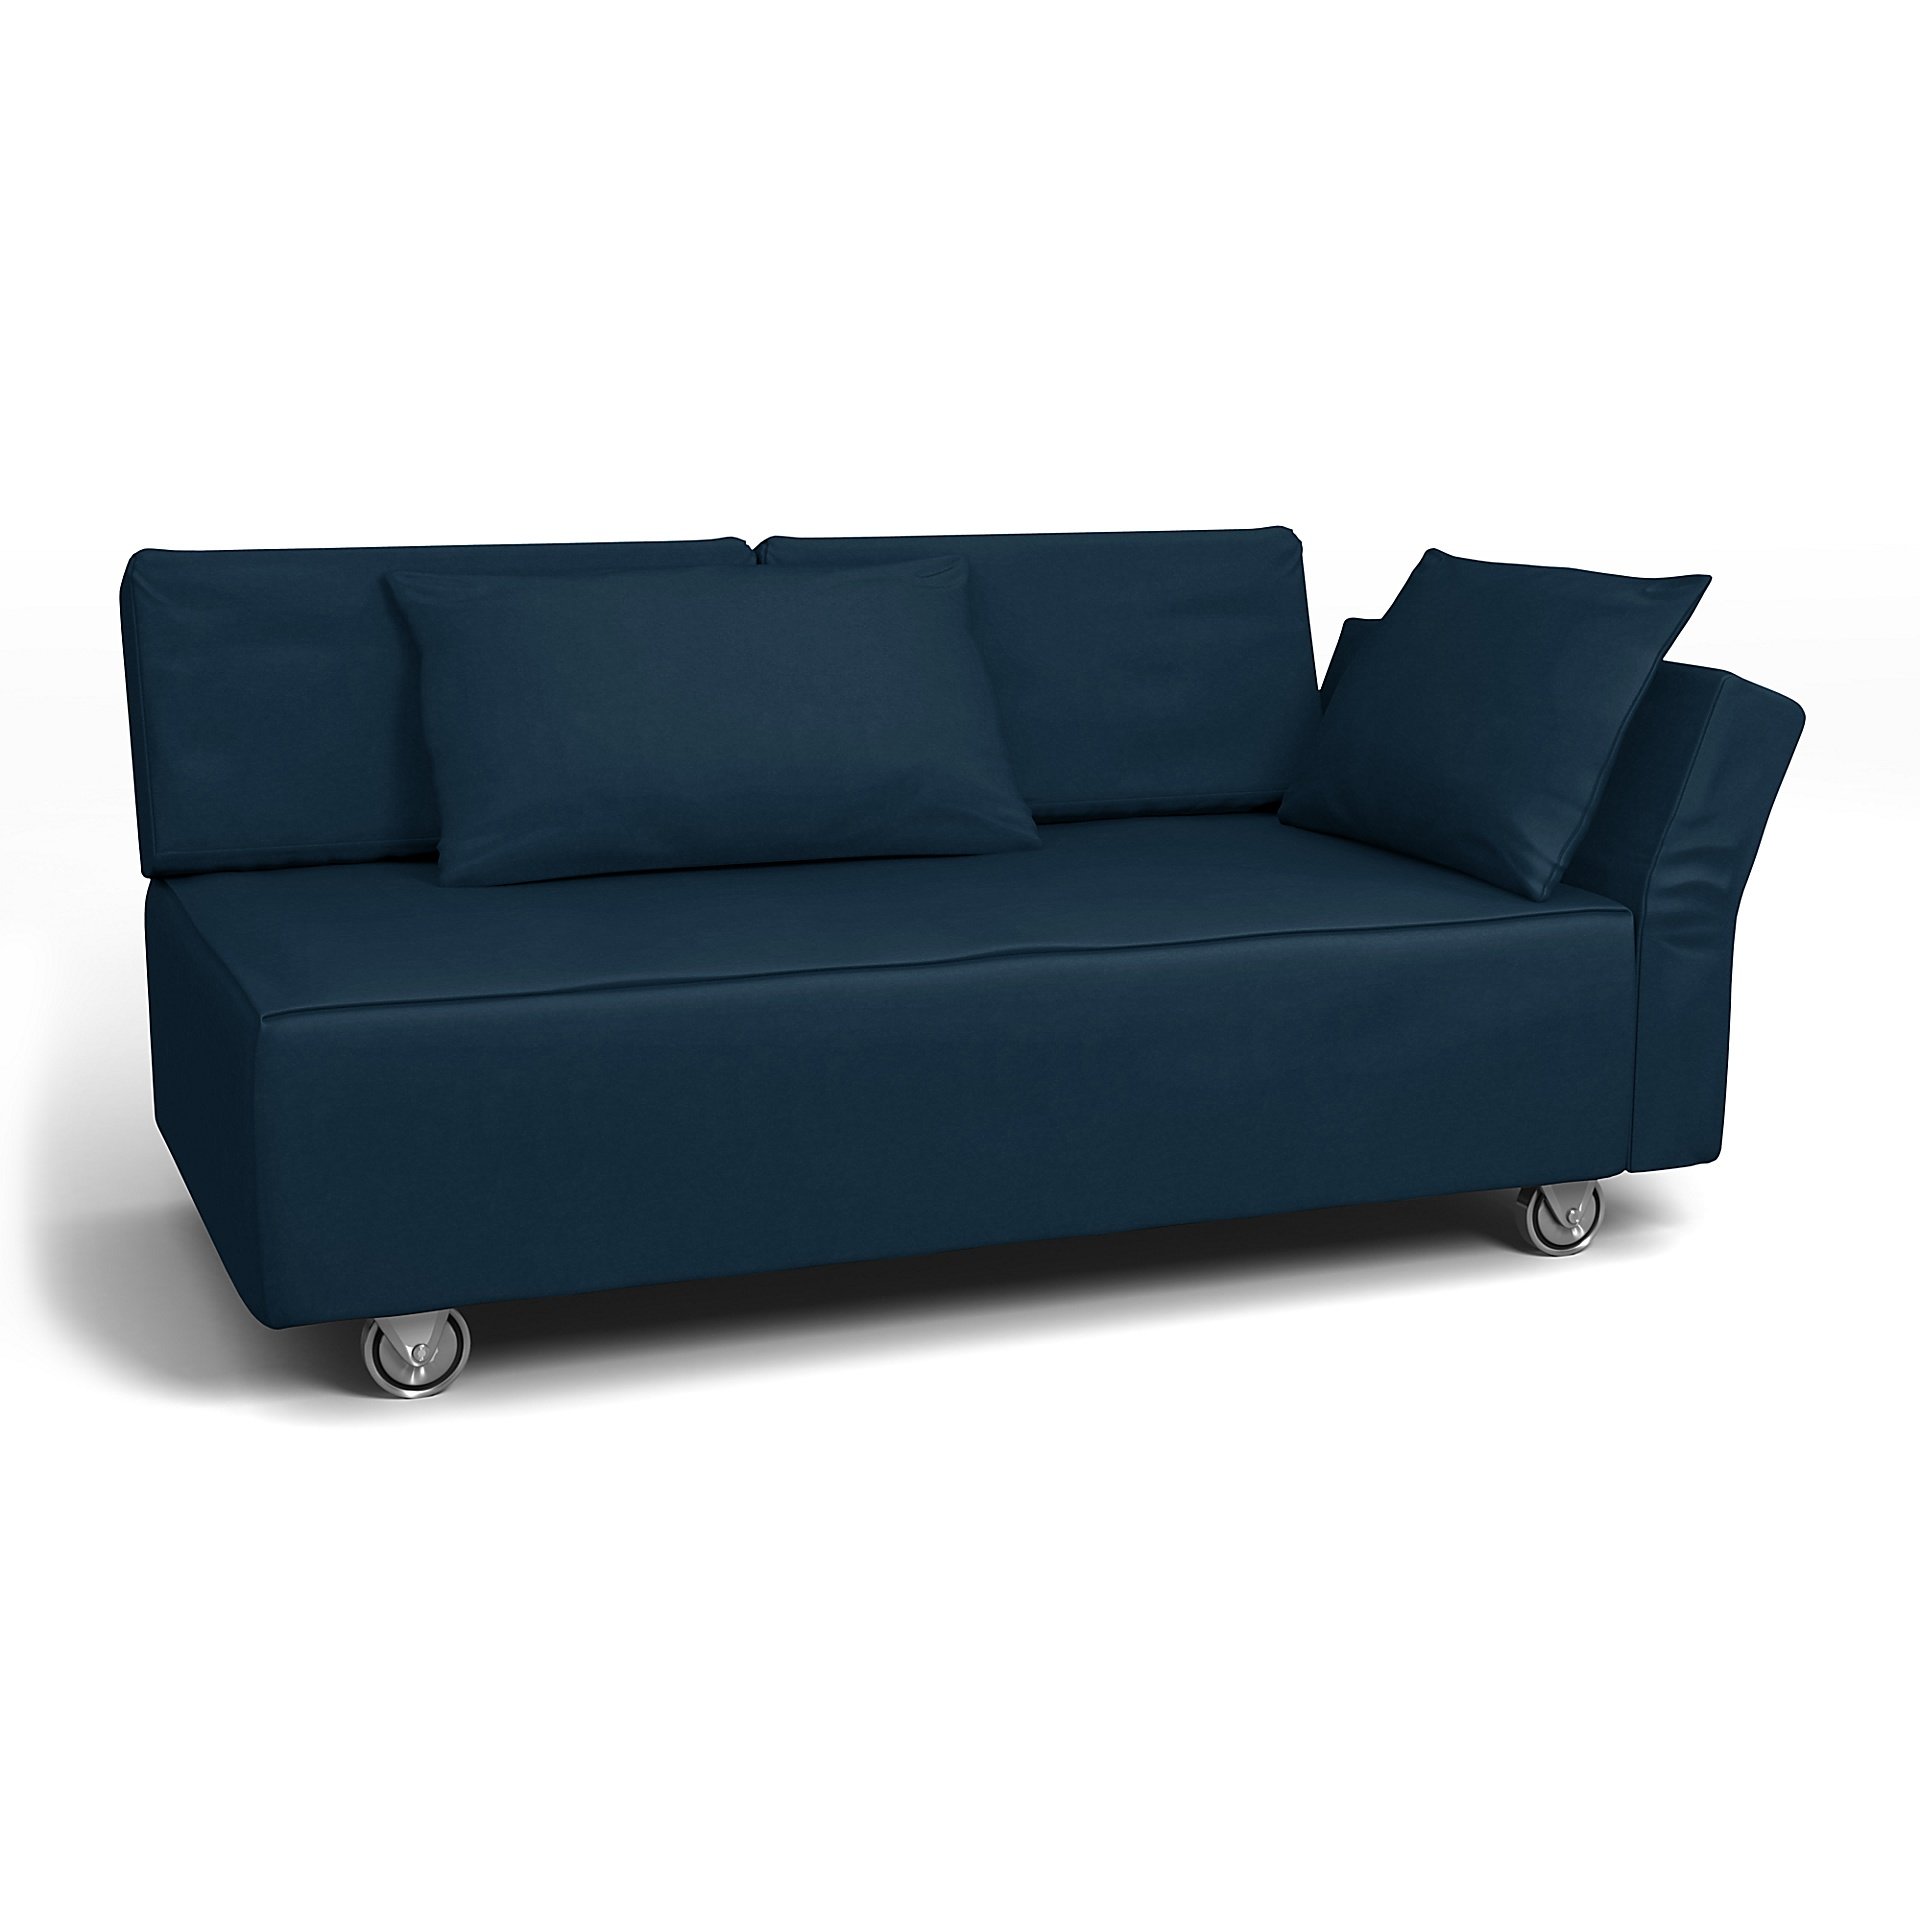 IKEA - Falsterbo 2 Seat Sofa with Right Arm Cover, Midnight, Velvet - Bemz